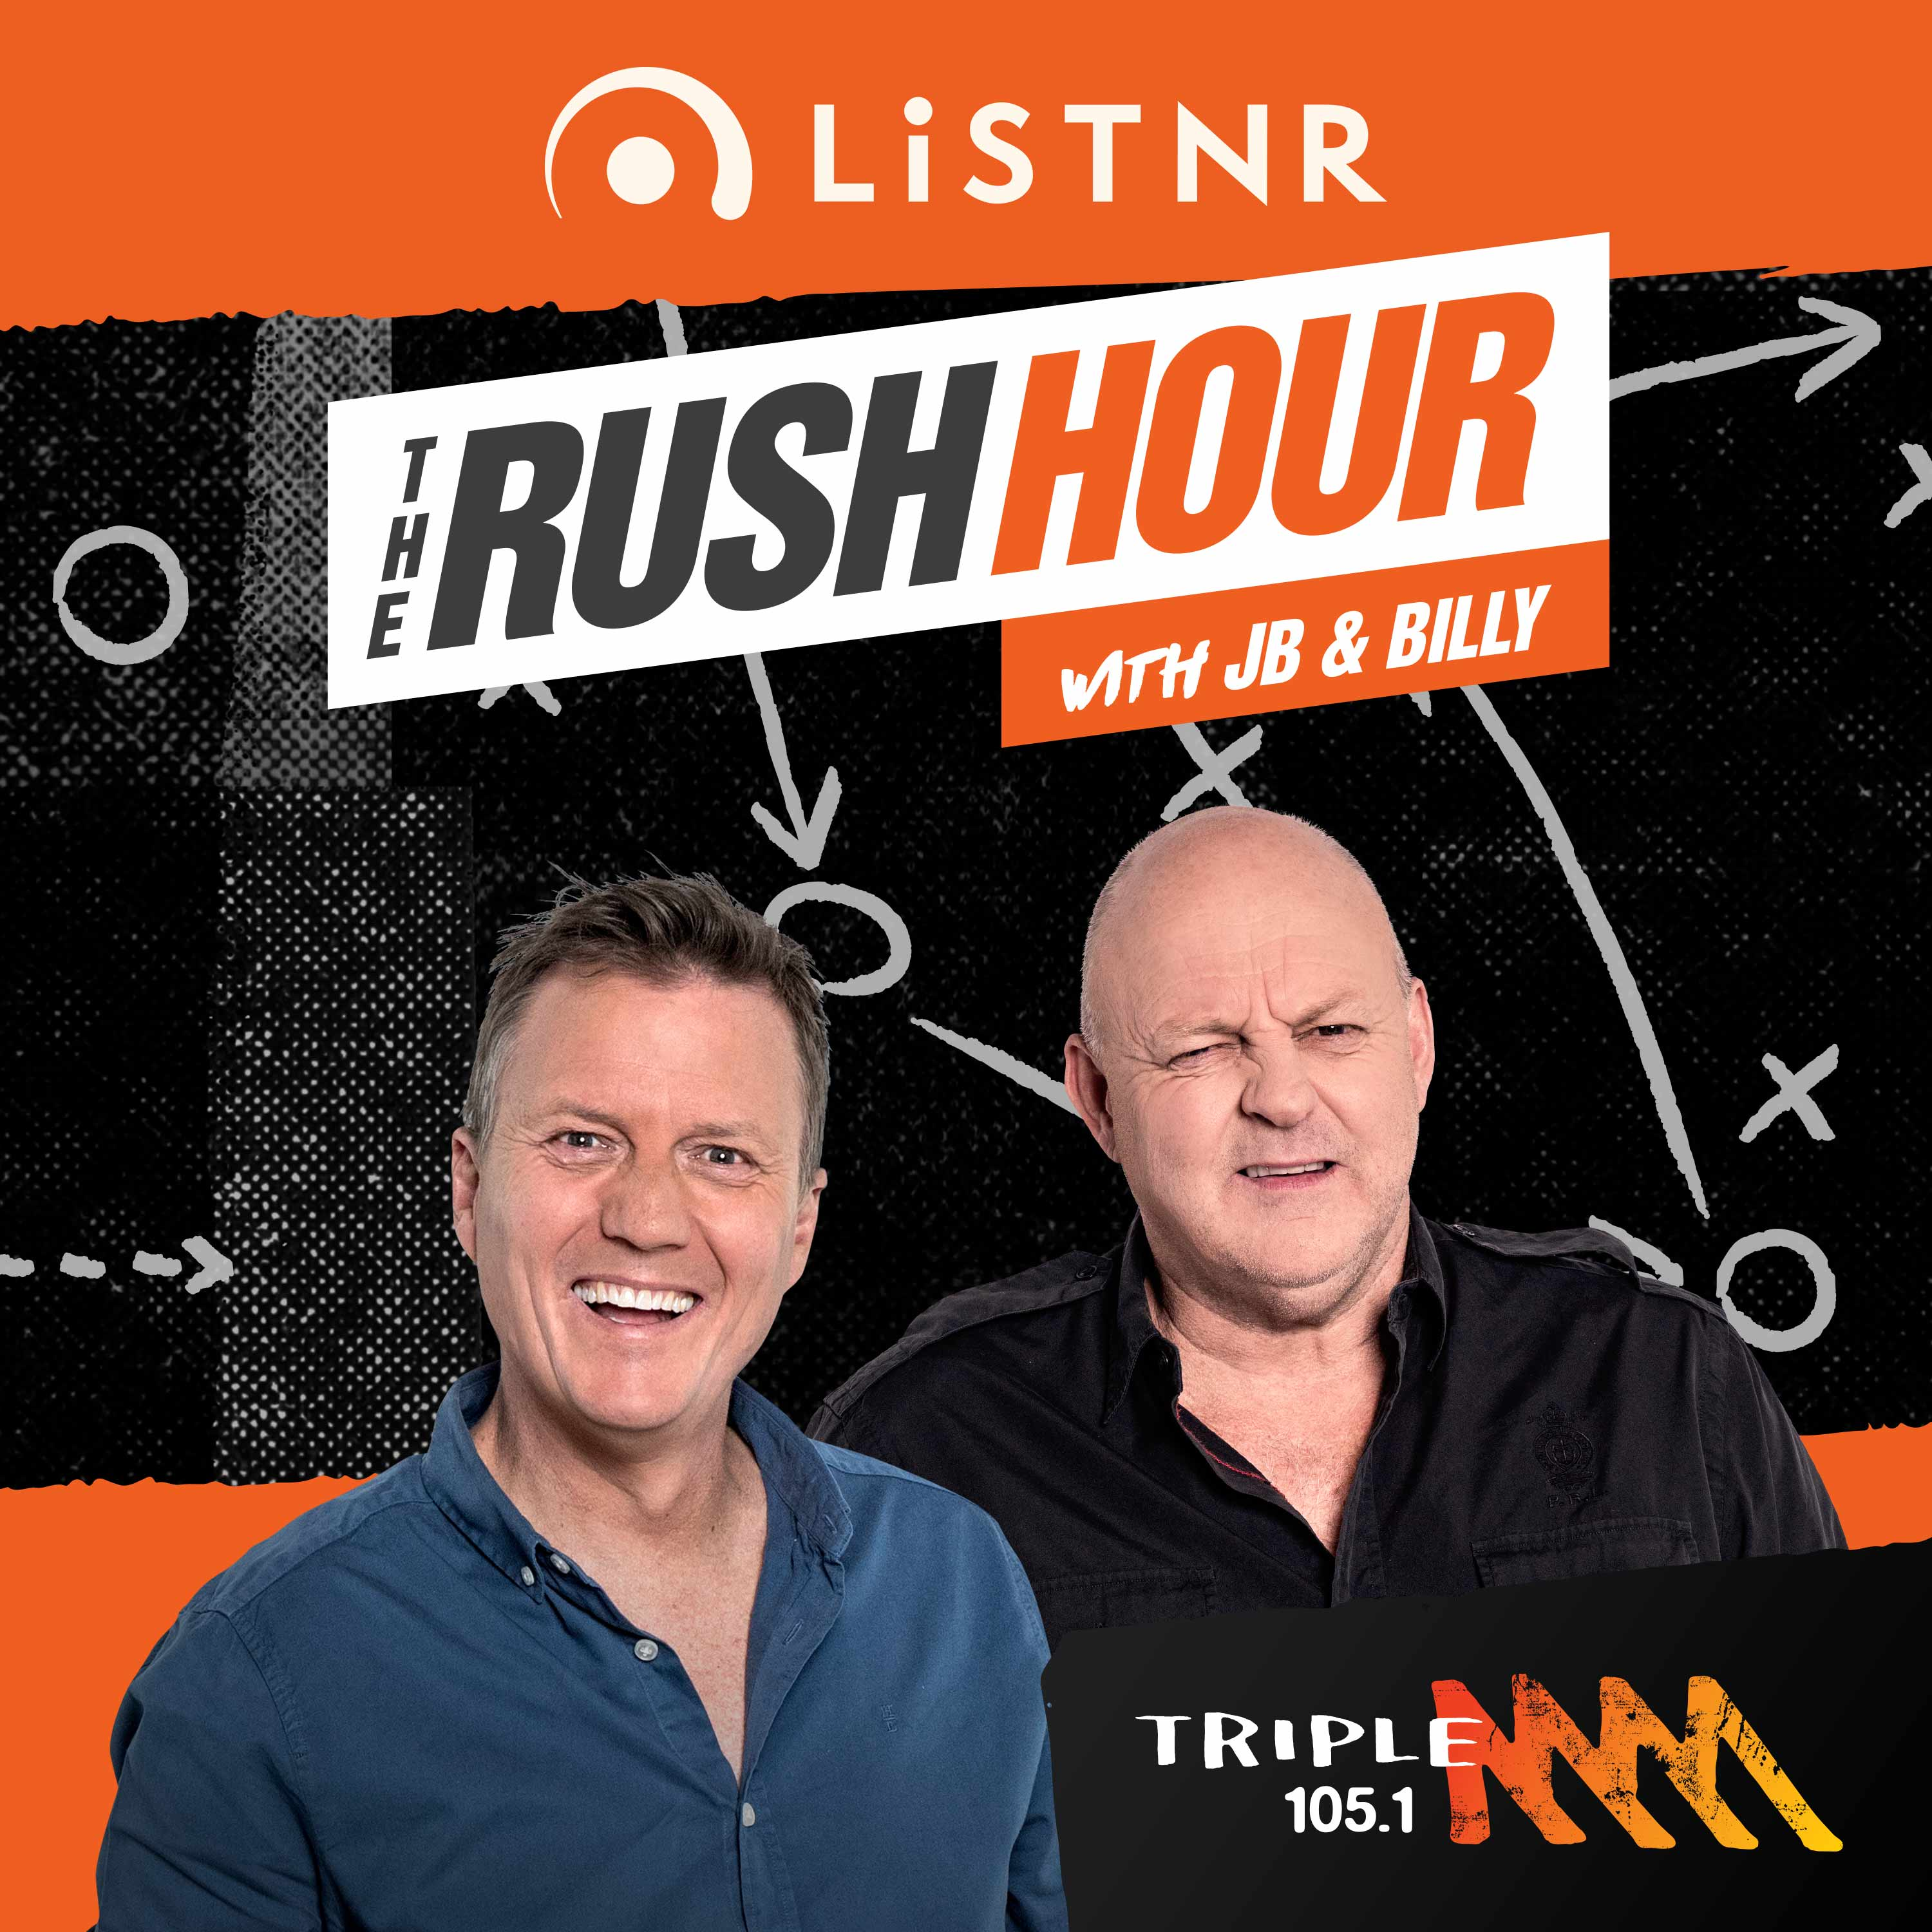 Friday Brag Artist, Joey has mail on Matt Short, Treloar's situation 'untenable' - The Rush Hour Catch Up podcast - Friday 6th November 2020